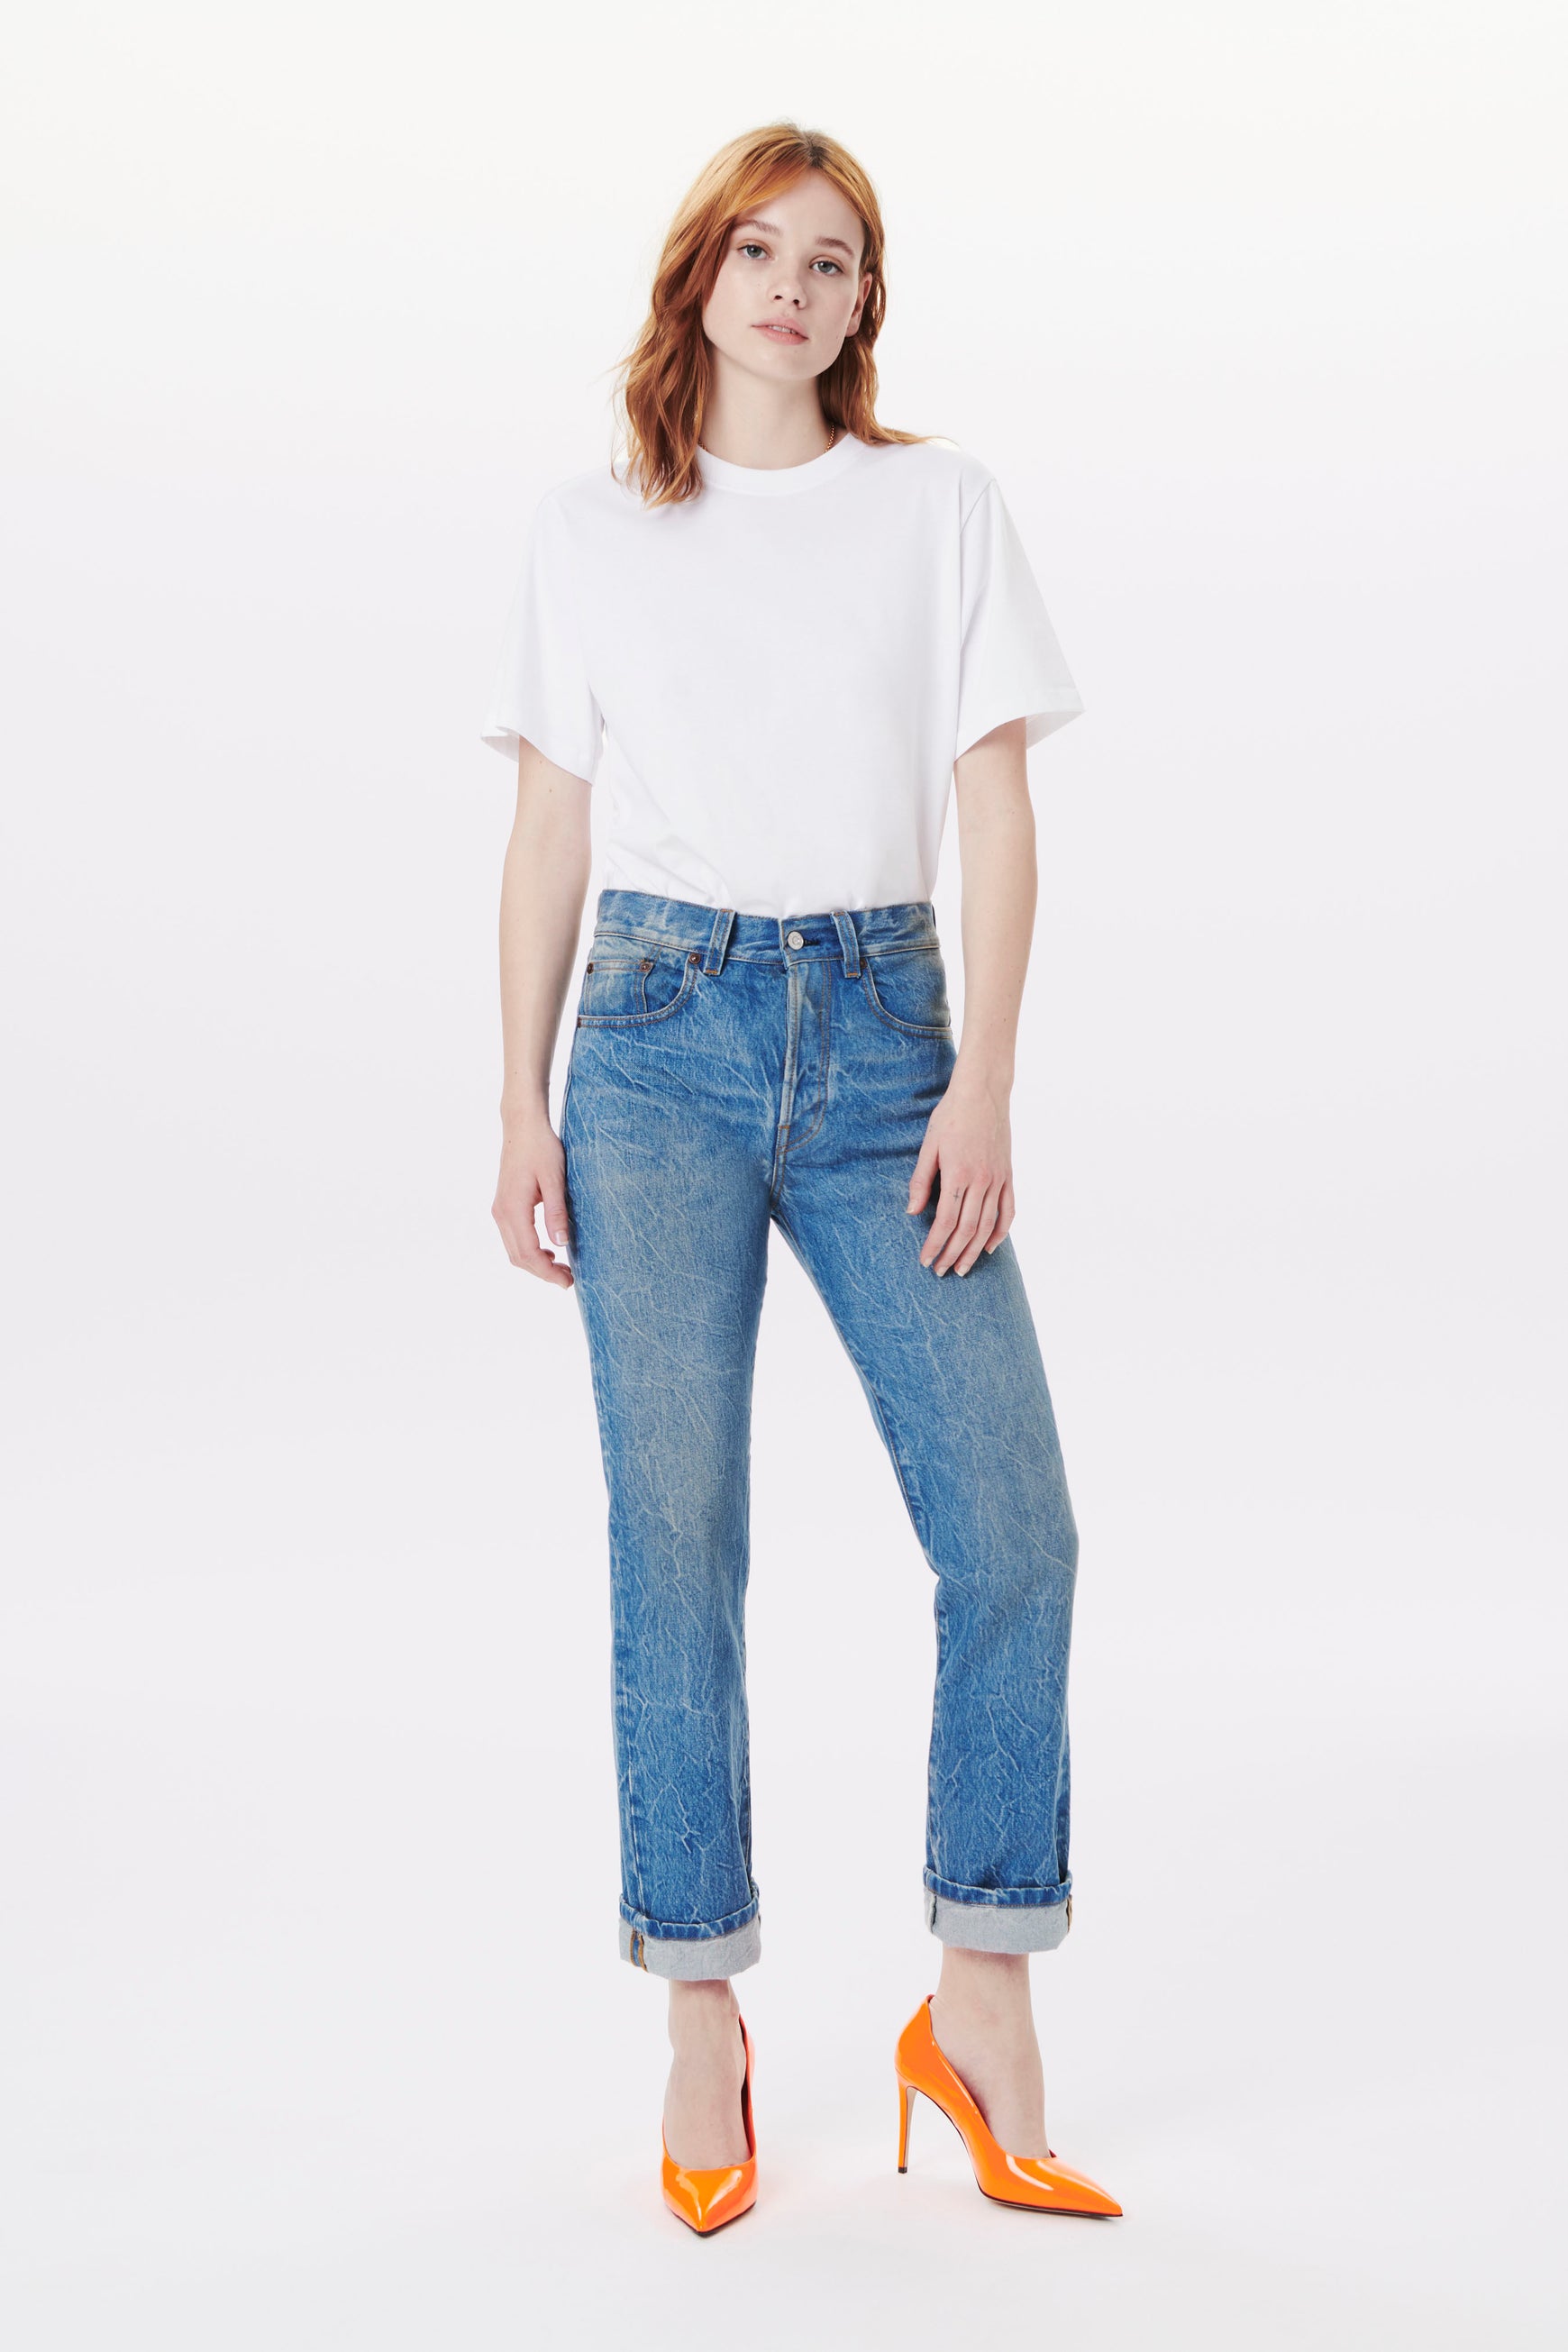 Model wearing the Victoria jean in a slightly cropped length style, perfect for everyday wear. Designer mid rise jeans in a washed denim colour, with a branded leather patch and a classic button fly detail.